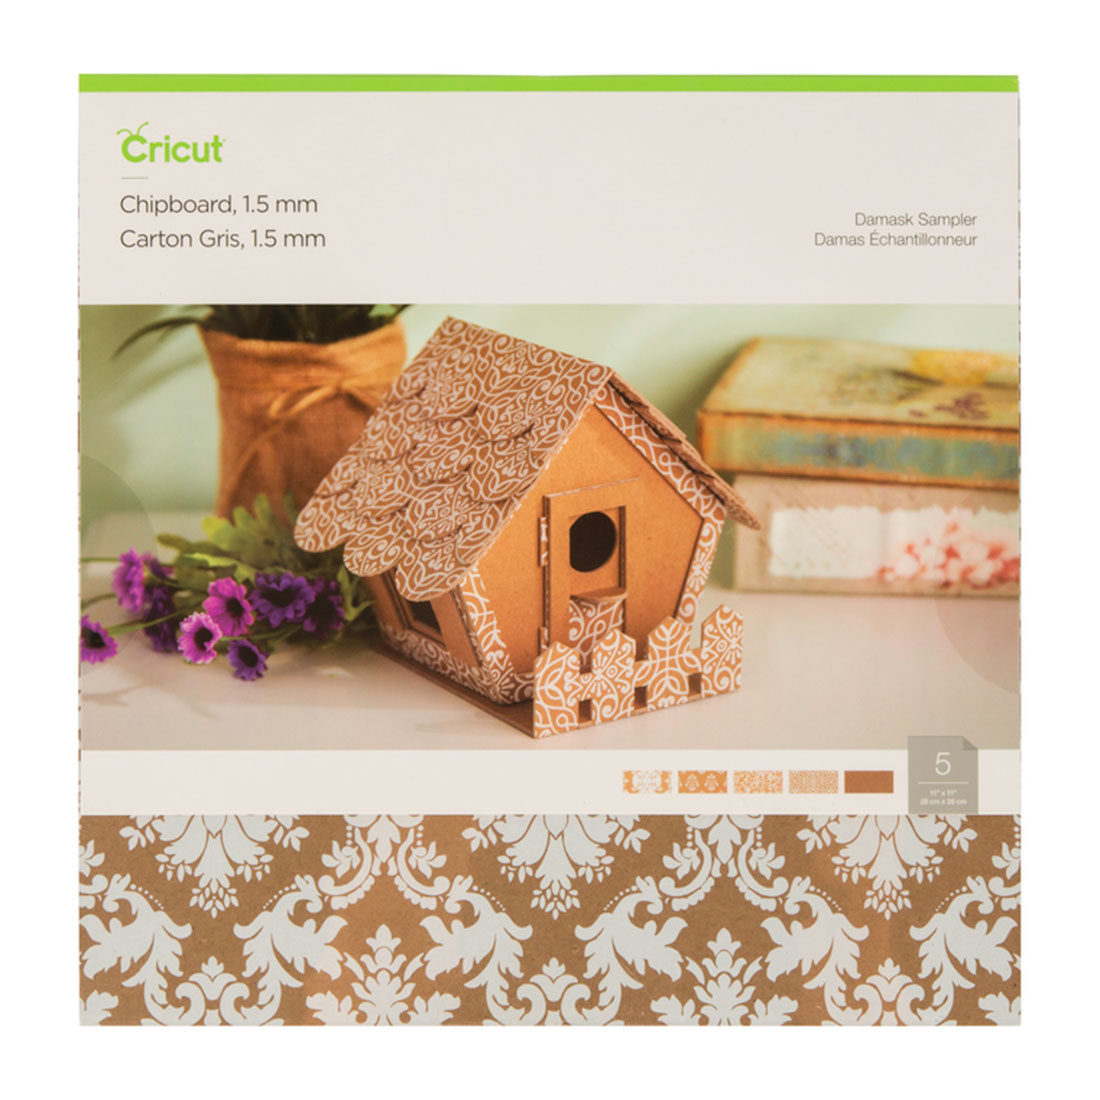 Explore the Versatility of Cricut Chipboard for Crafting